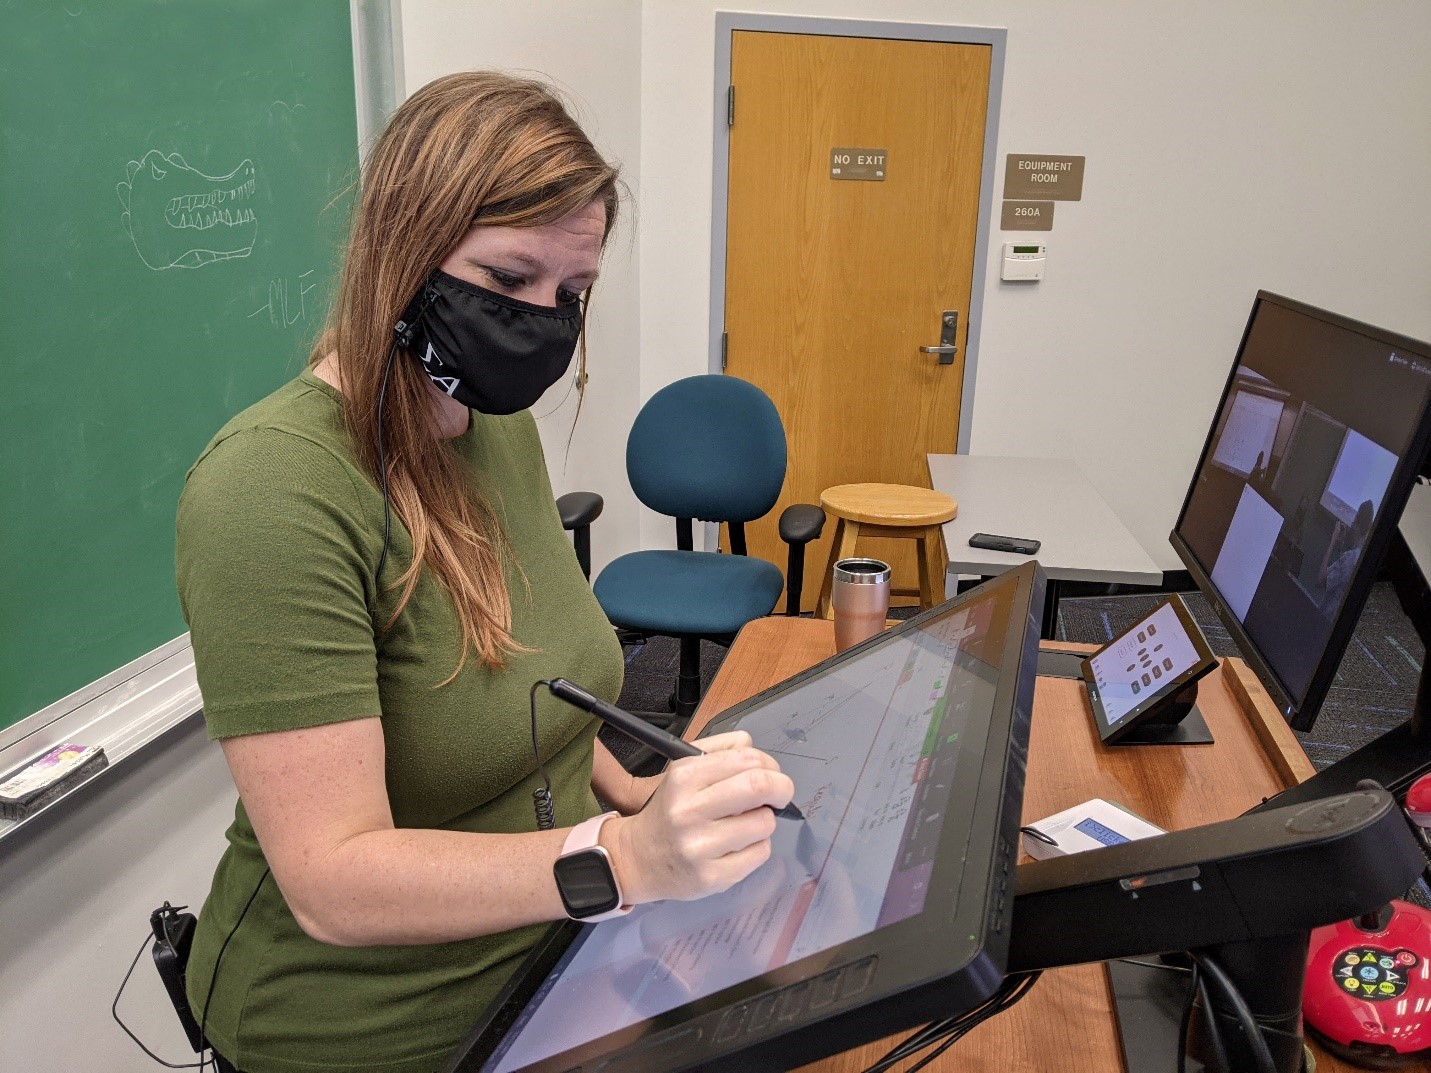 Professor at the University of Florida using an annotation monitor in a classroom with HyFlex Technology.